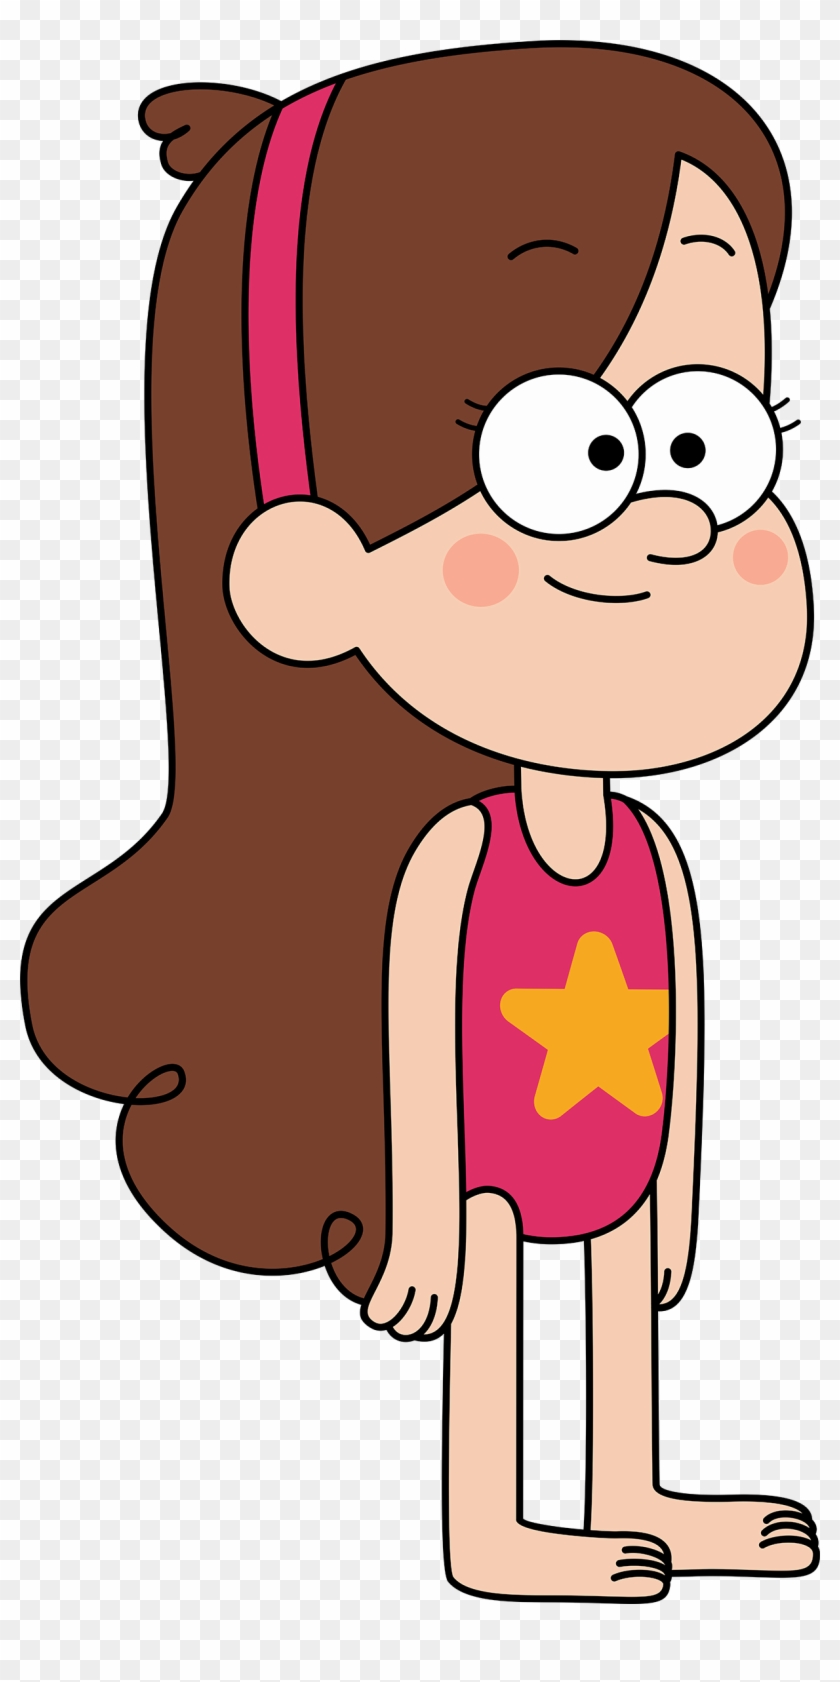 Spoilerclick To View - Gravity Falls Mabel Swimsuit #1373756